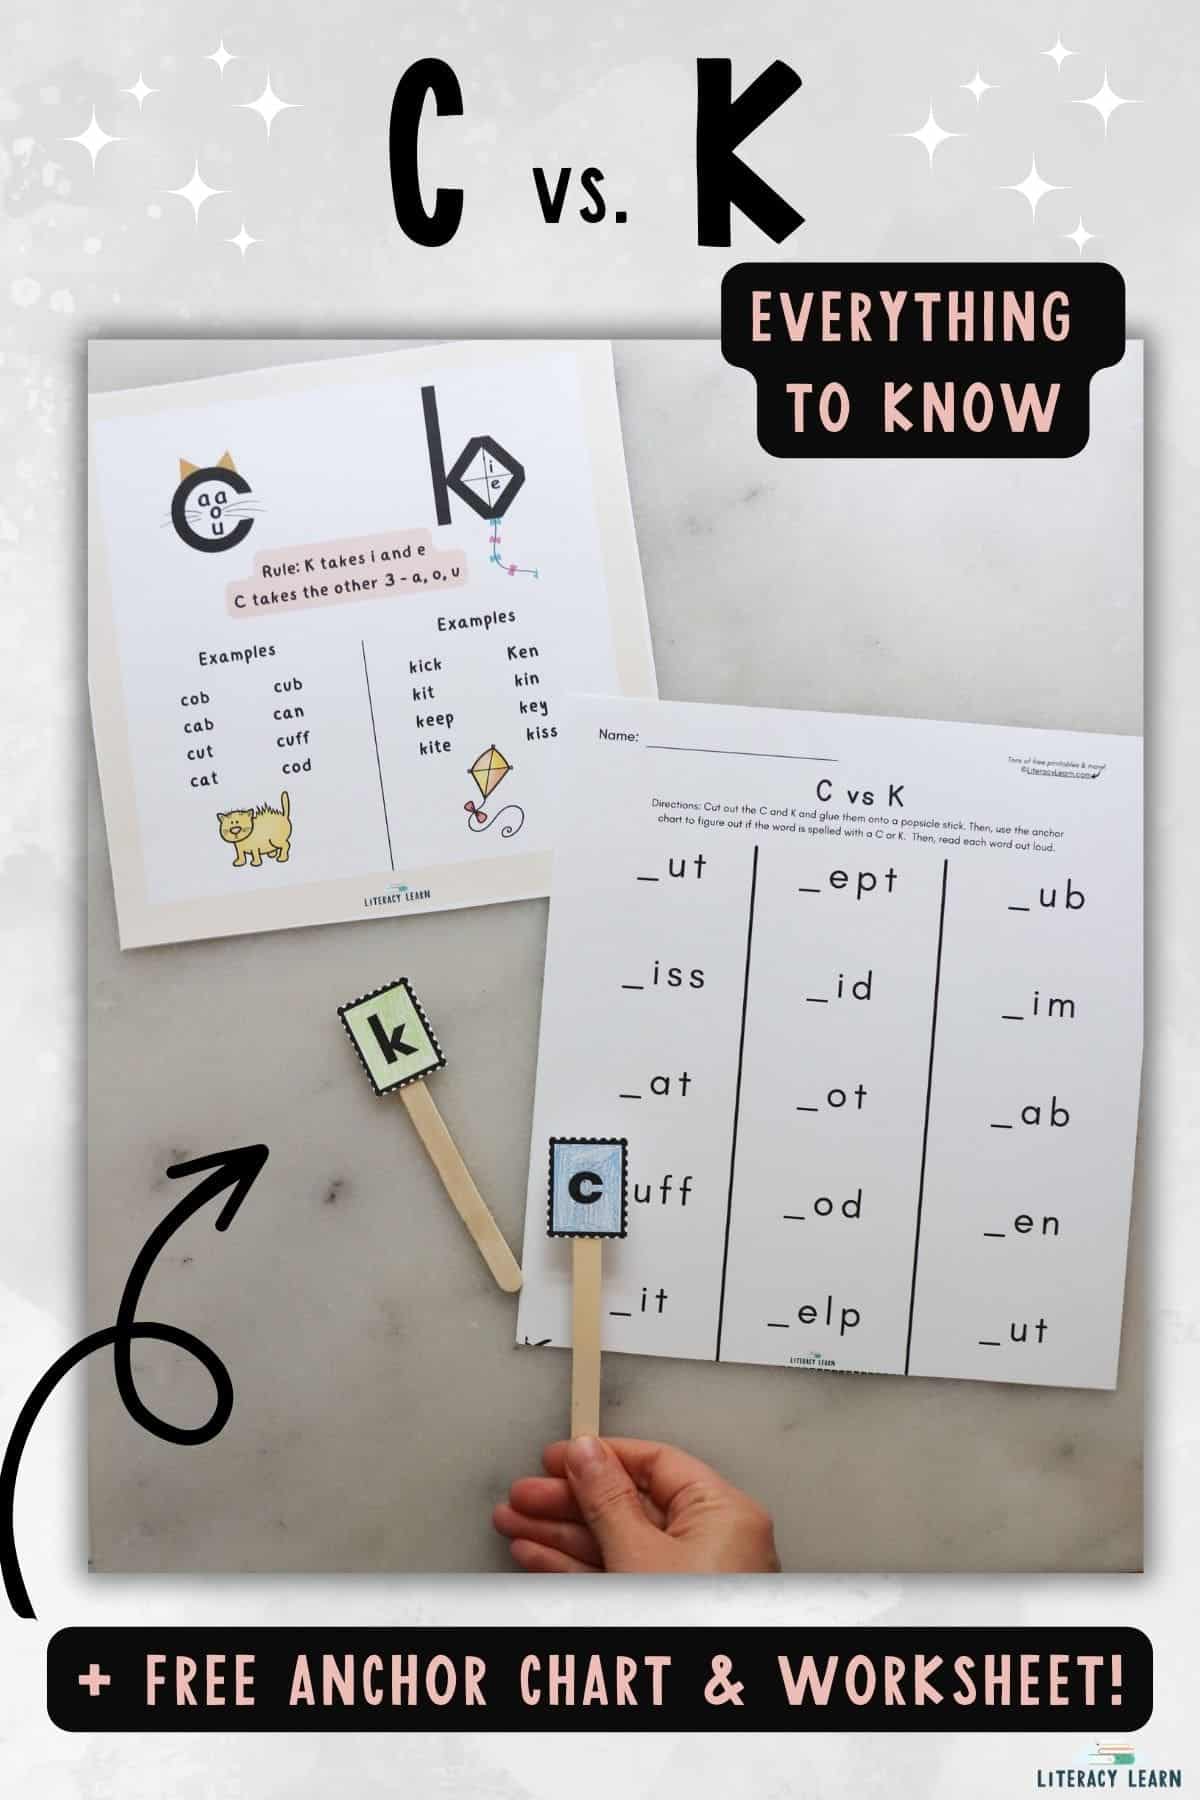 Graphic titled "C vs K" with a photograph of student's hand with Anchor Chart and Worksheet.